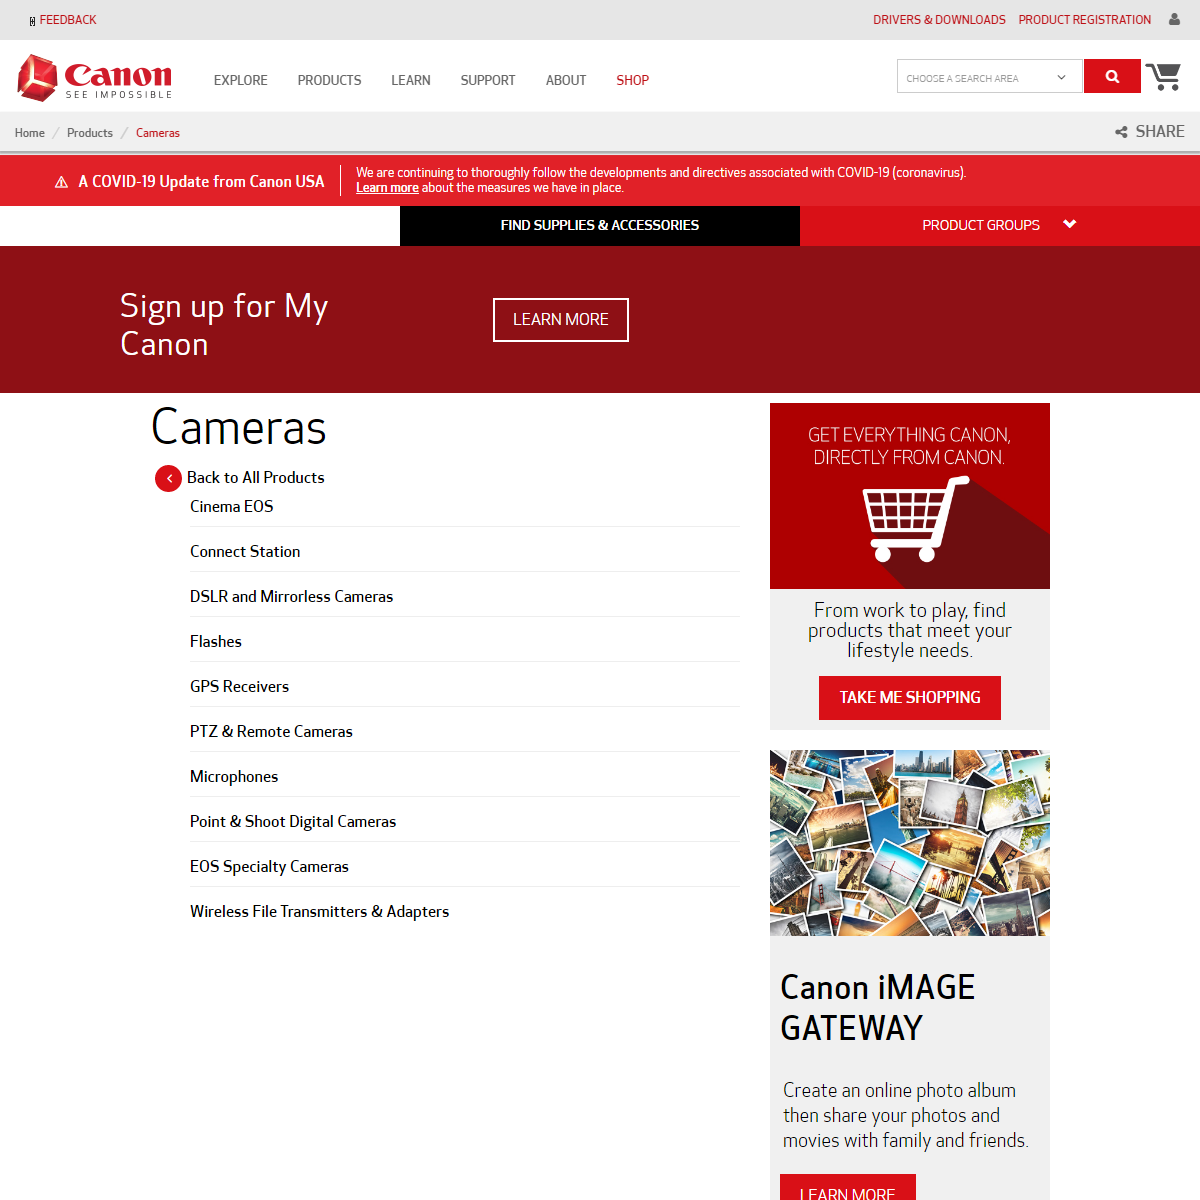 A complete backup of https://www.usa.canon.com/internet/portal/us/home/products/groups/cameras/